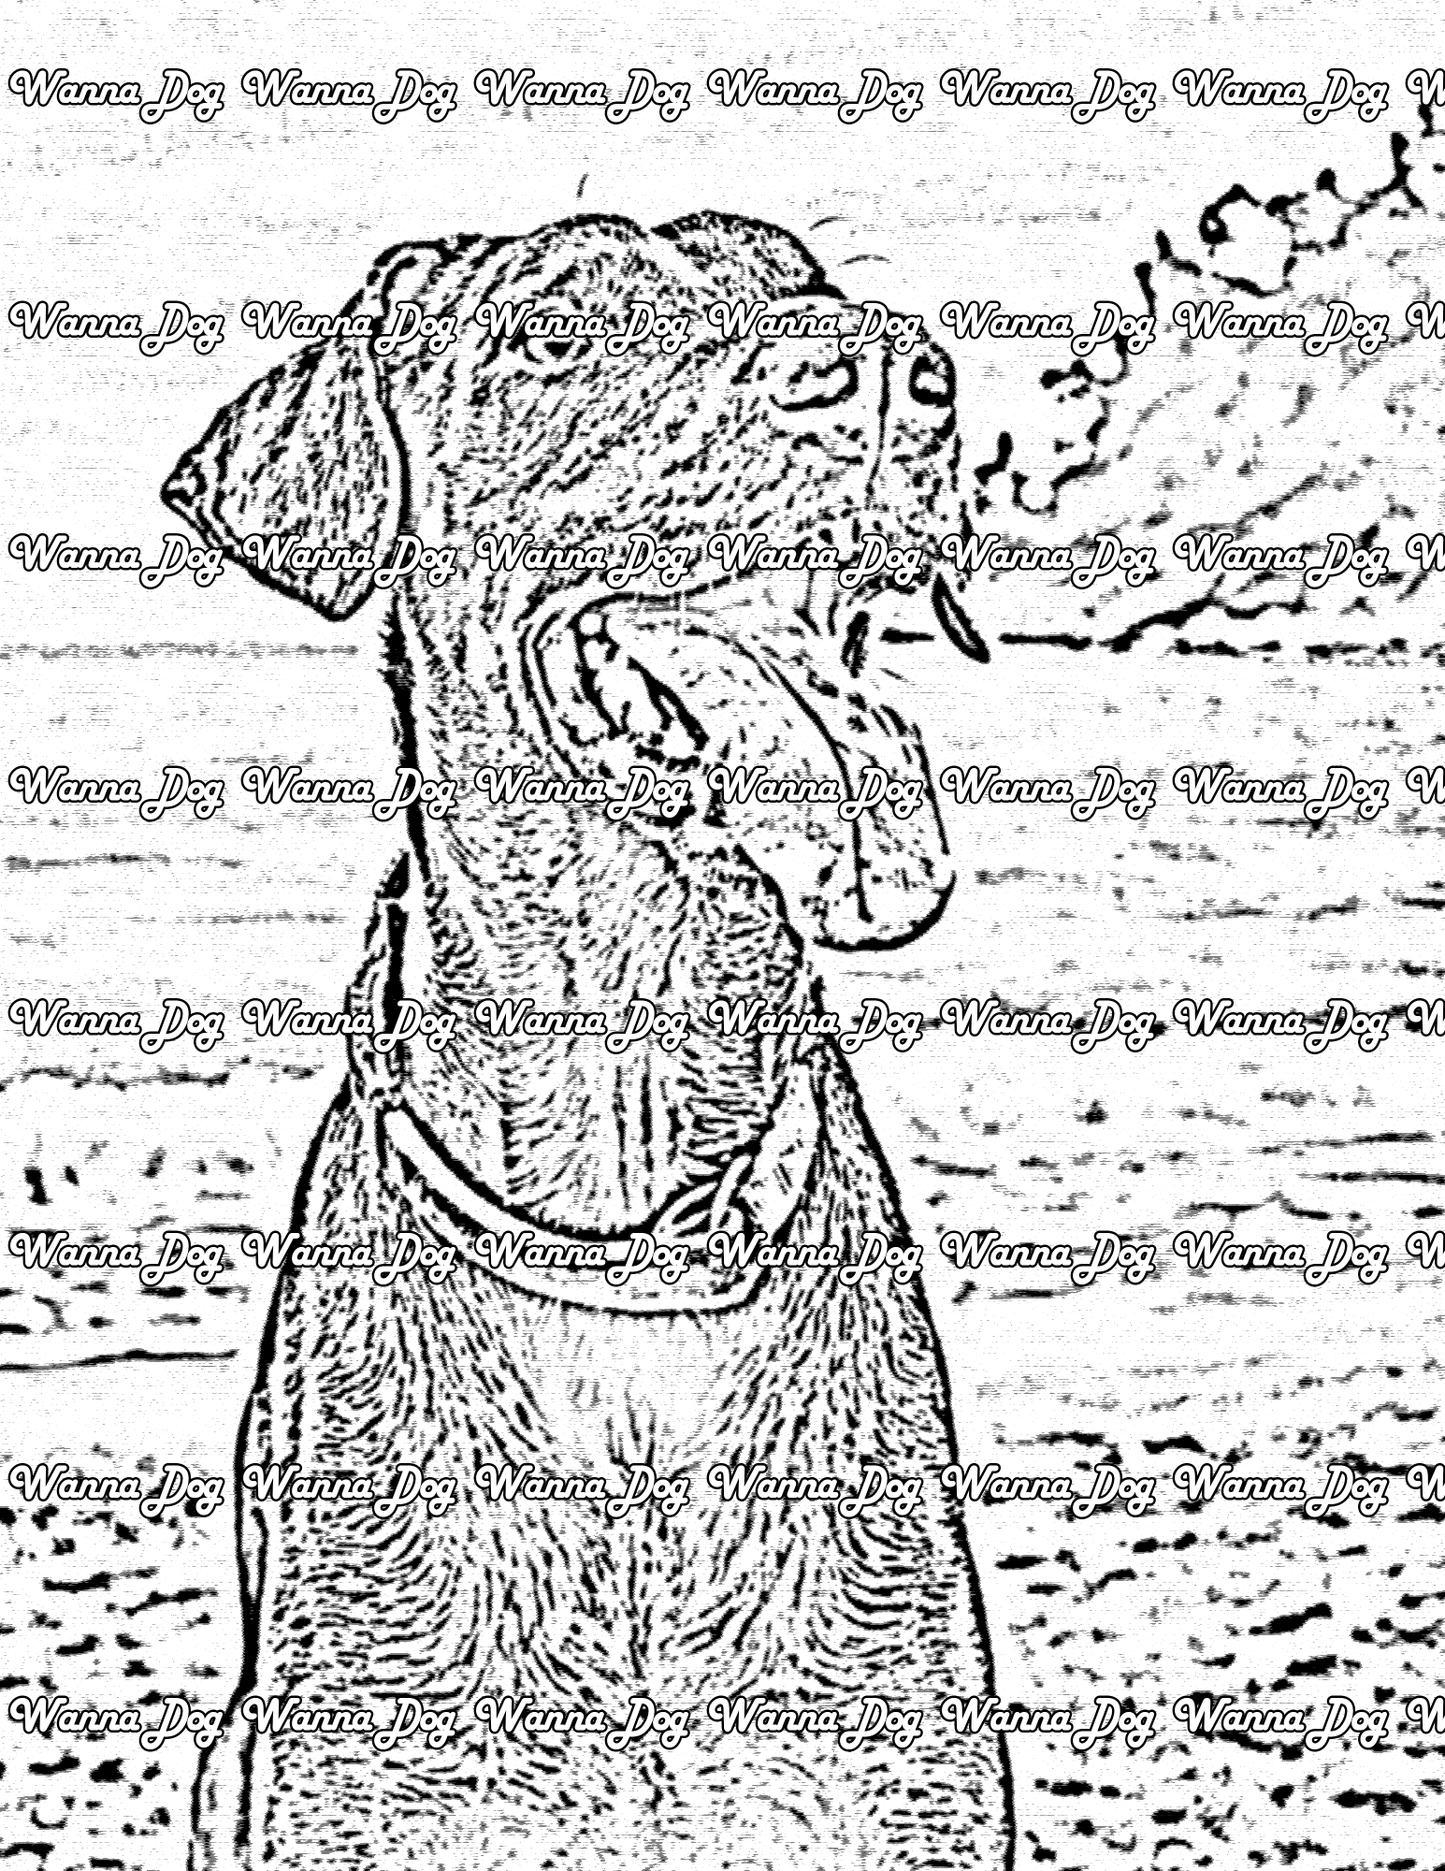 Doberman Coloring Page of a Doberman at the beach with their tongue out, away from the water